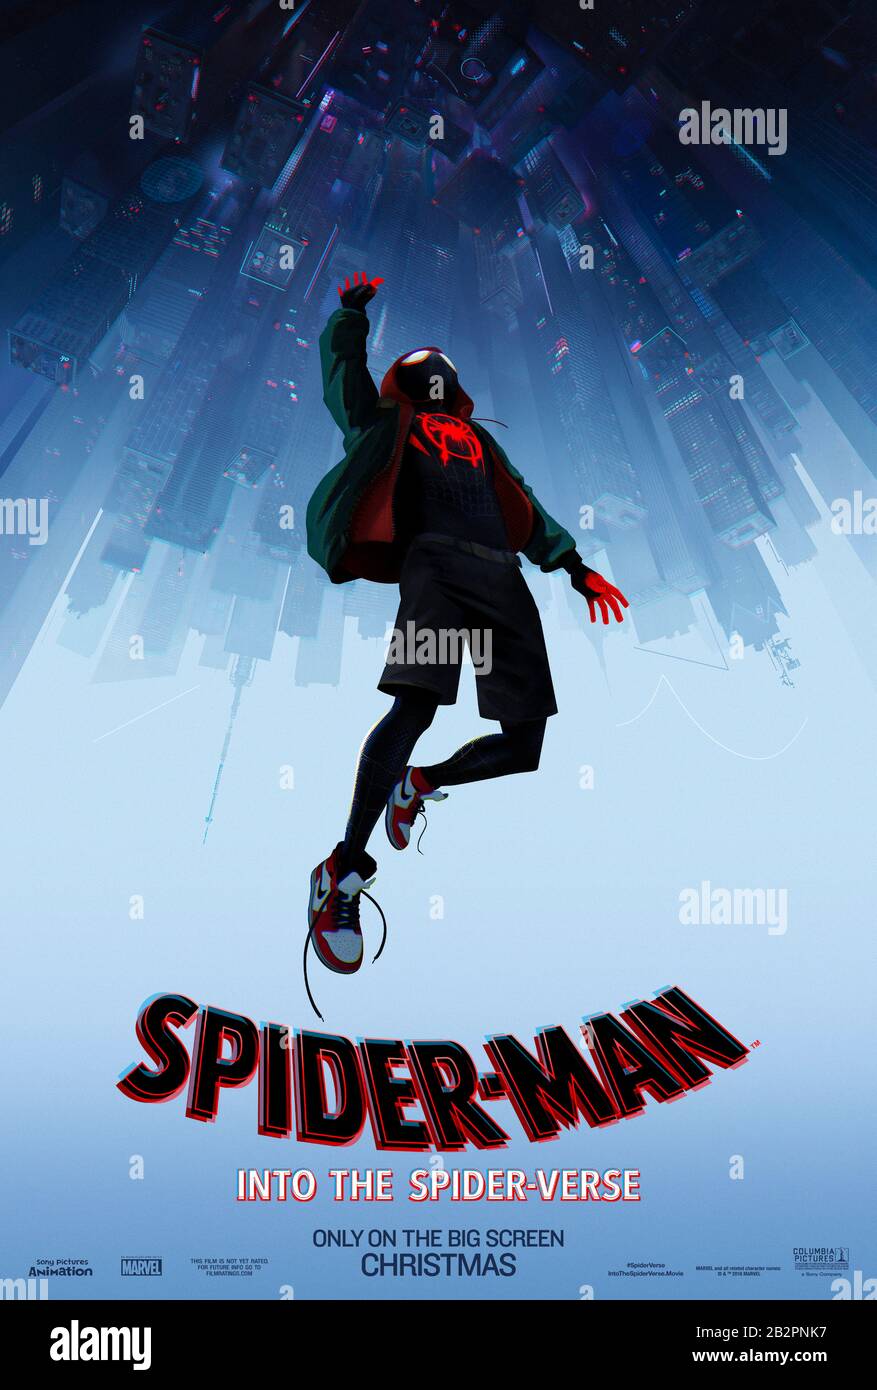 Spider-Man: Into the Spider-Verse (2018) directed by Bob Persichetti and Peter Ramsey and starring Shameik Moore, Jake Johnson and Hailee Steinfeld. Stylish animation about Spider-Man teaming up with other versions from different dimensions. Stock Photo